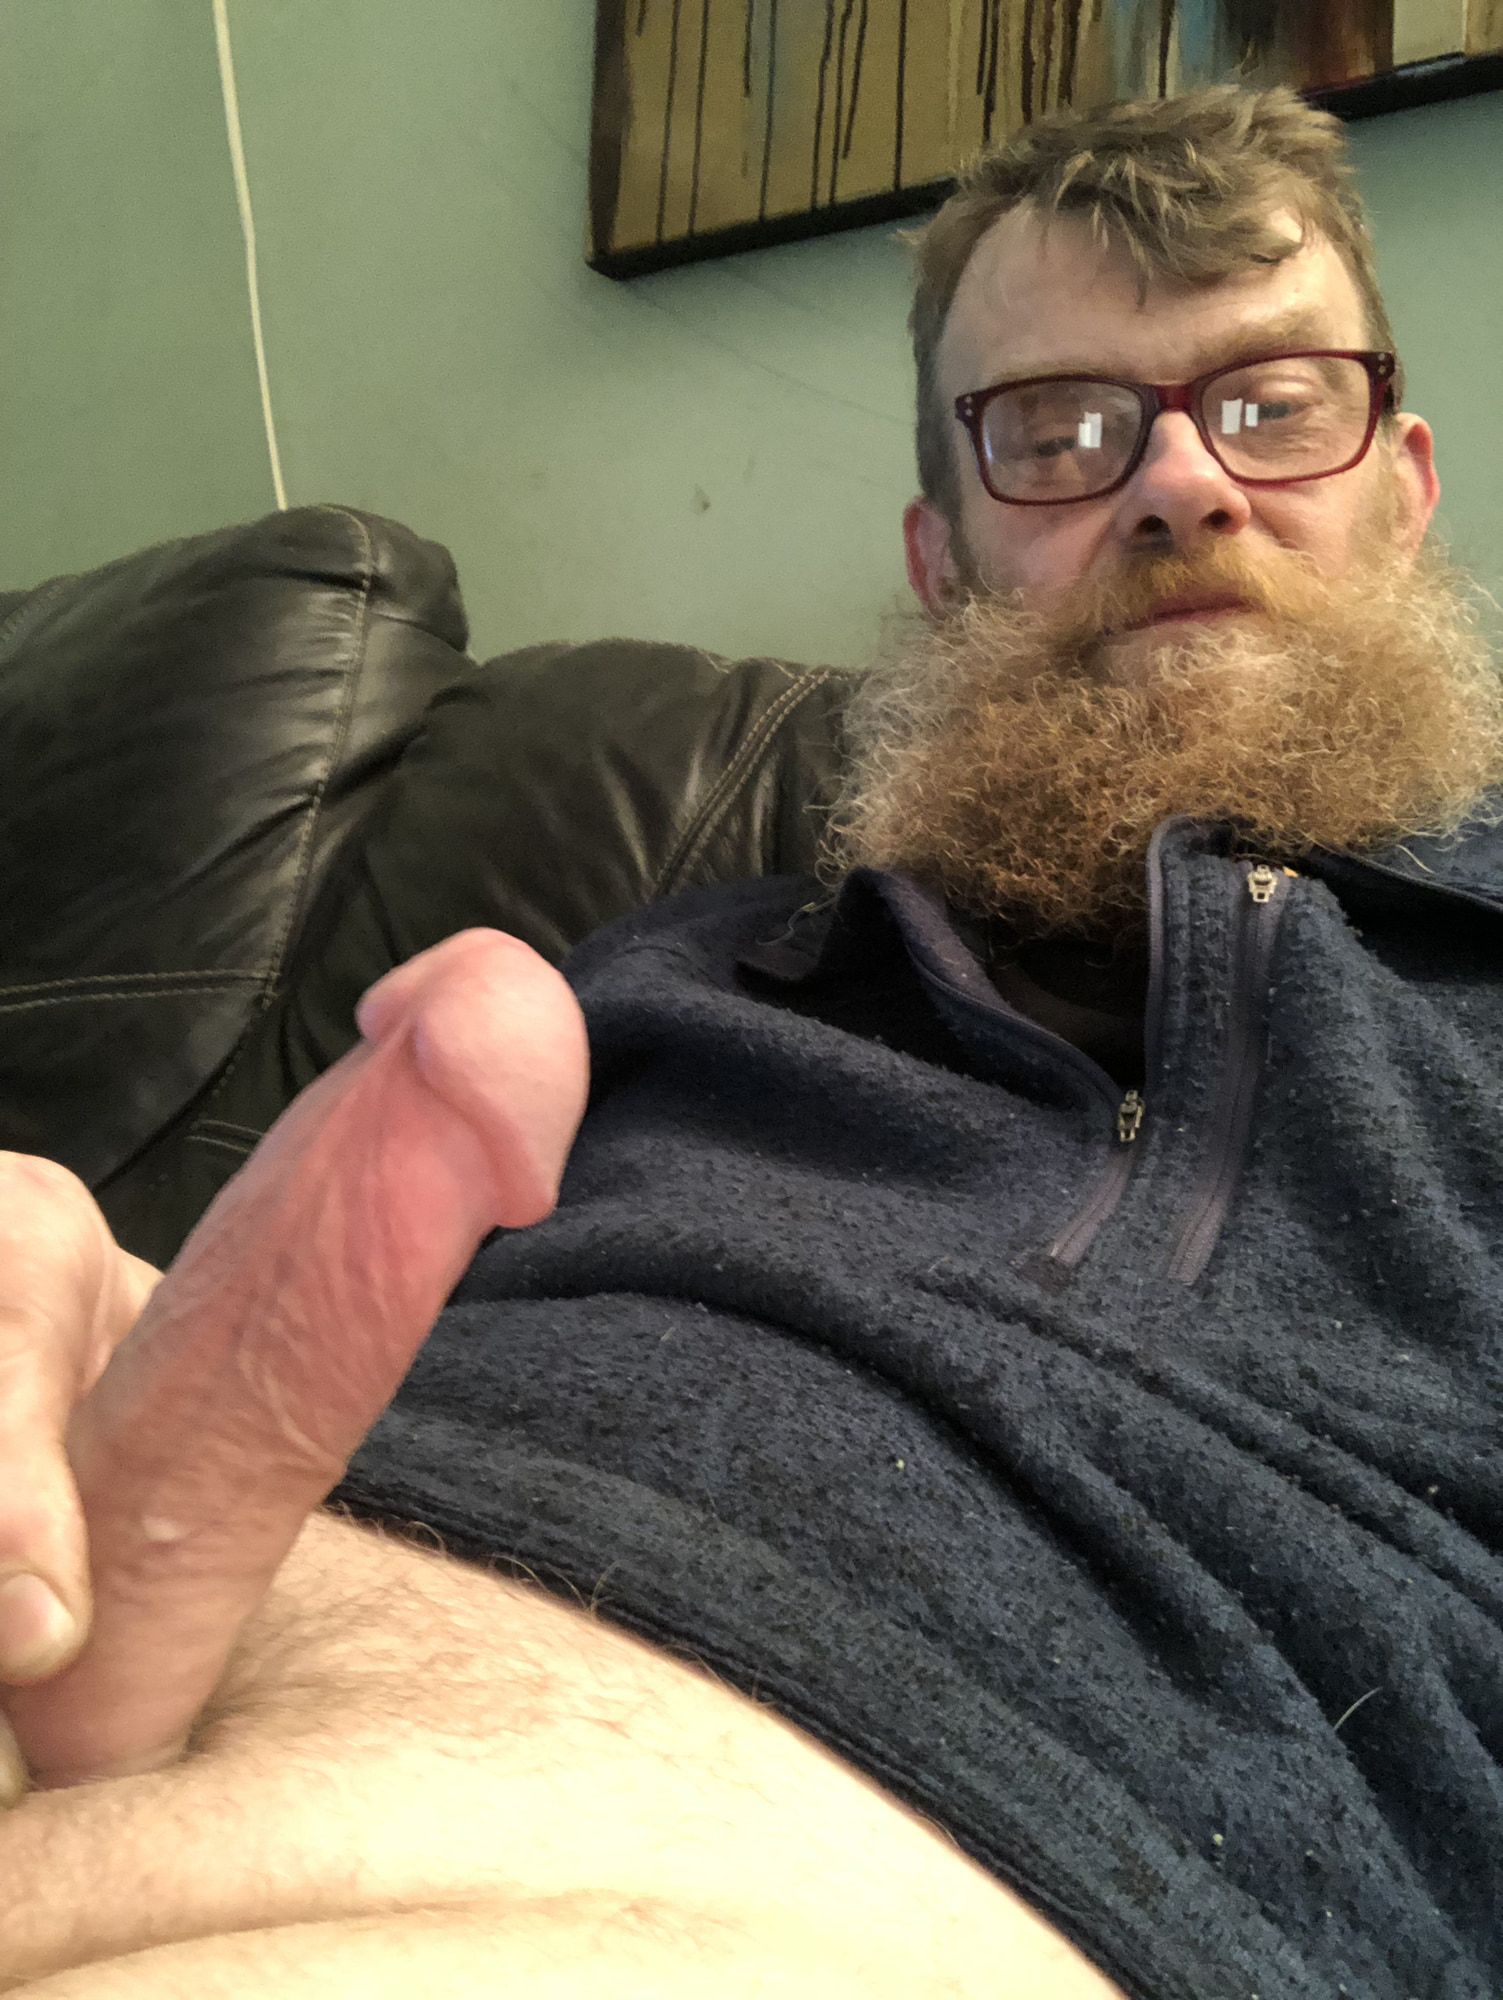 Thinking of cock.